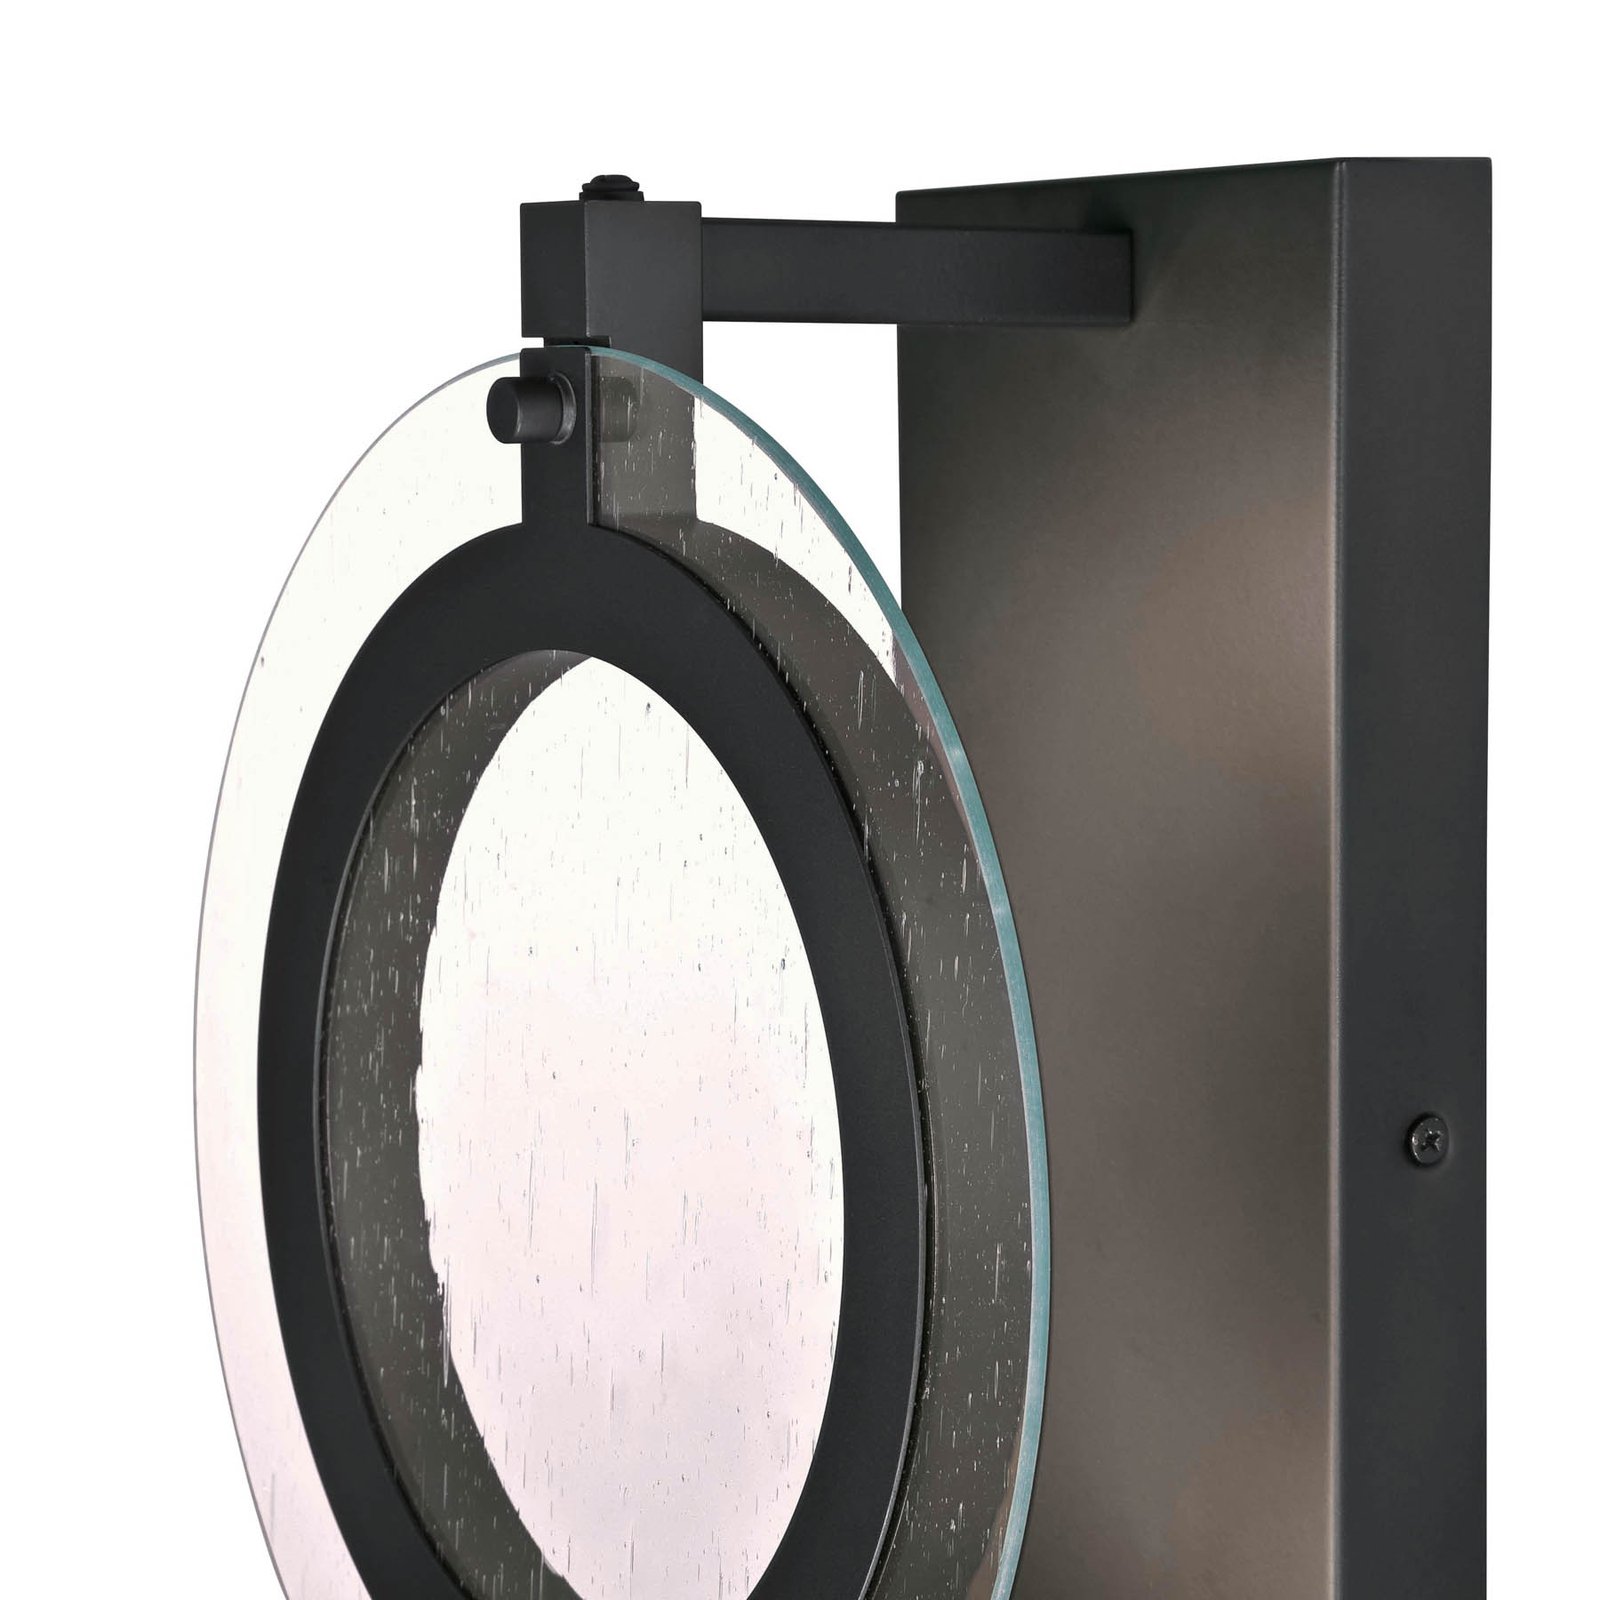 Westinghouse Maddox LED outdoor wall light, black